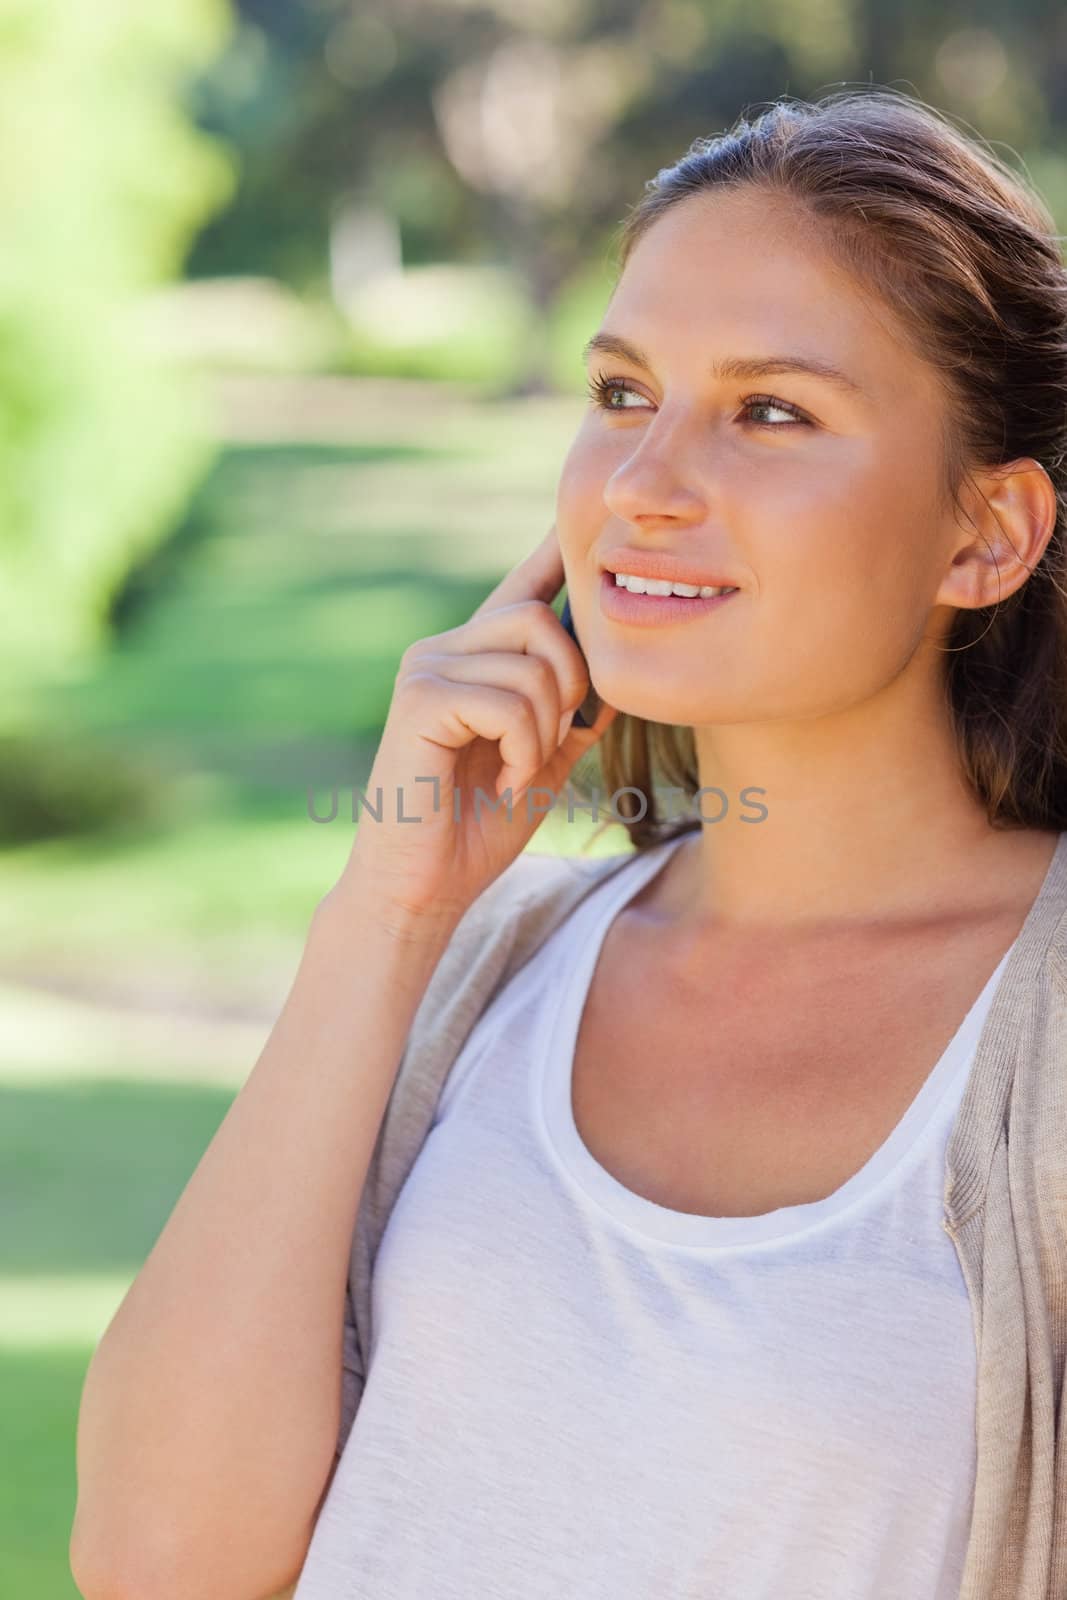 Smiling woman on her mobile phone in the park by Wavebreakmedia